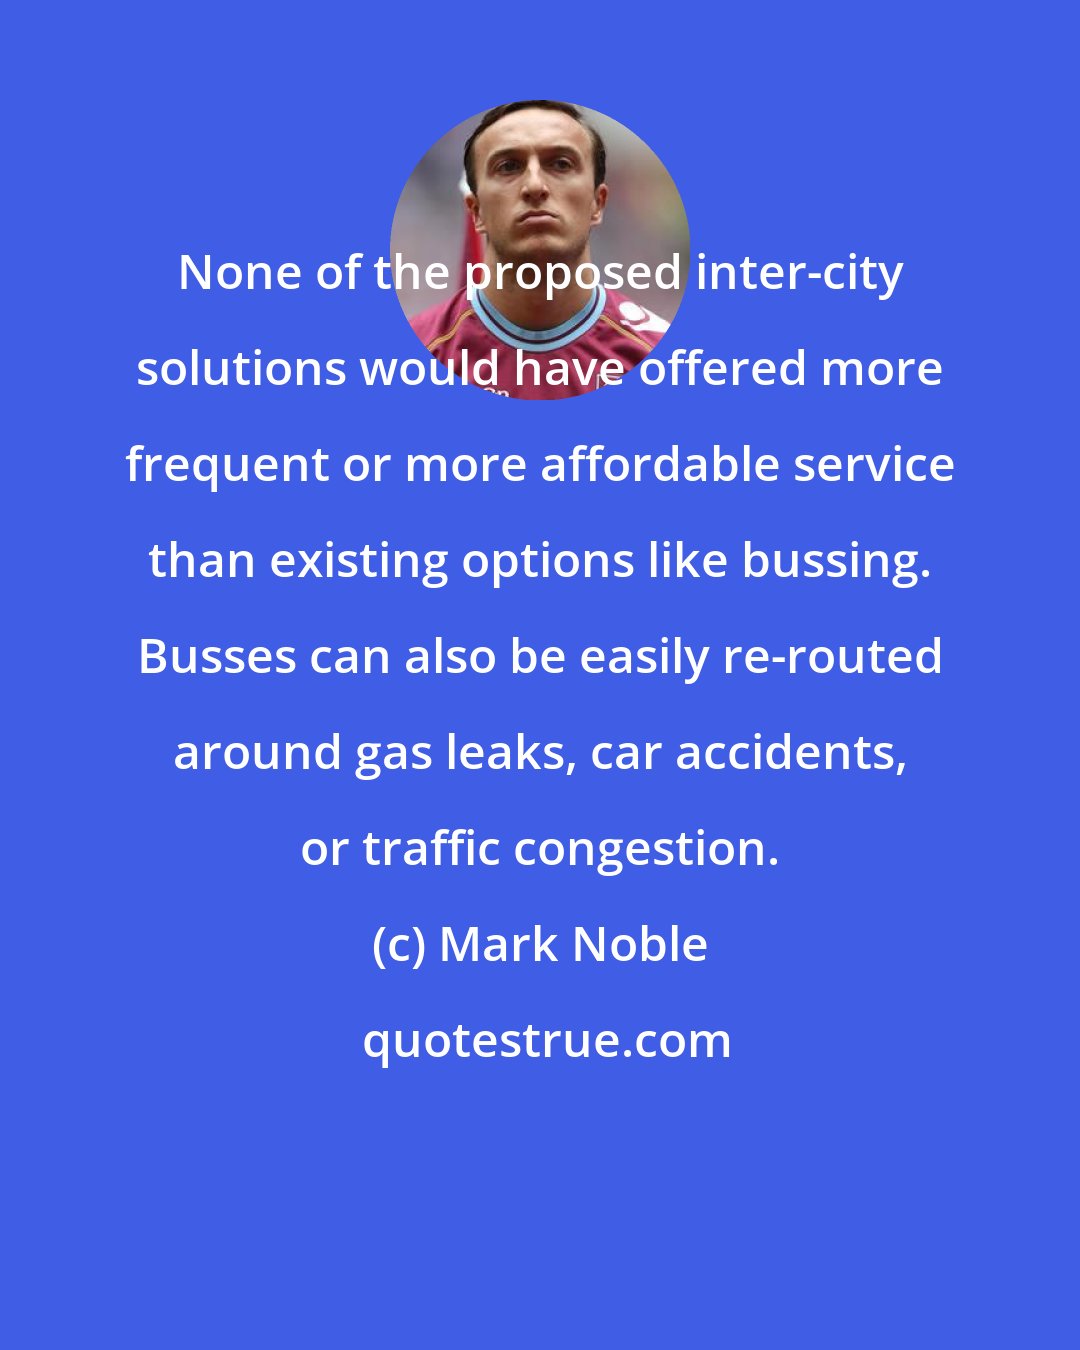 Mark Noble: None of the proposed inter-city solutions would have offered more frequent or more affordable service than existing options like bussing. Busses can also be easily re-routed around gas leaks, car accidents, or traffic congestion.